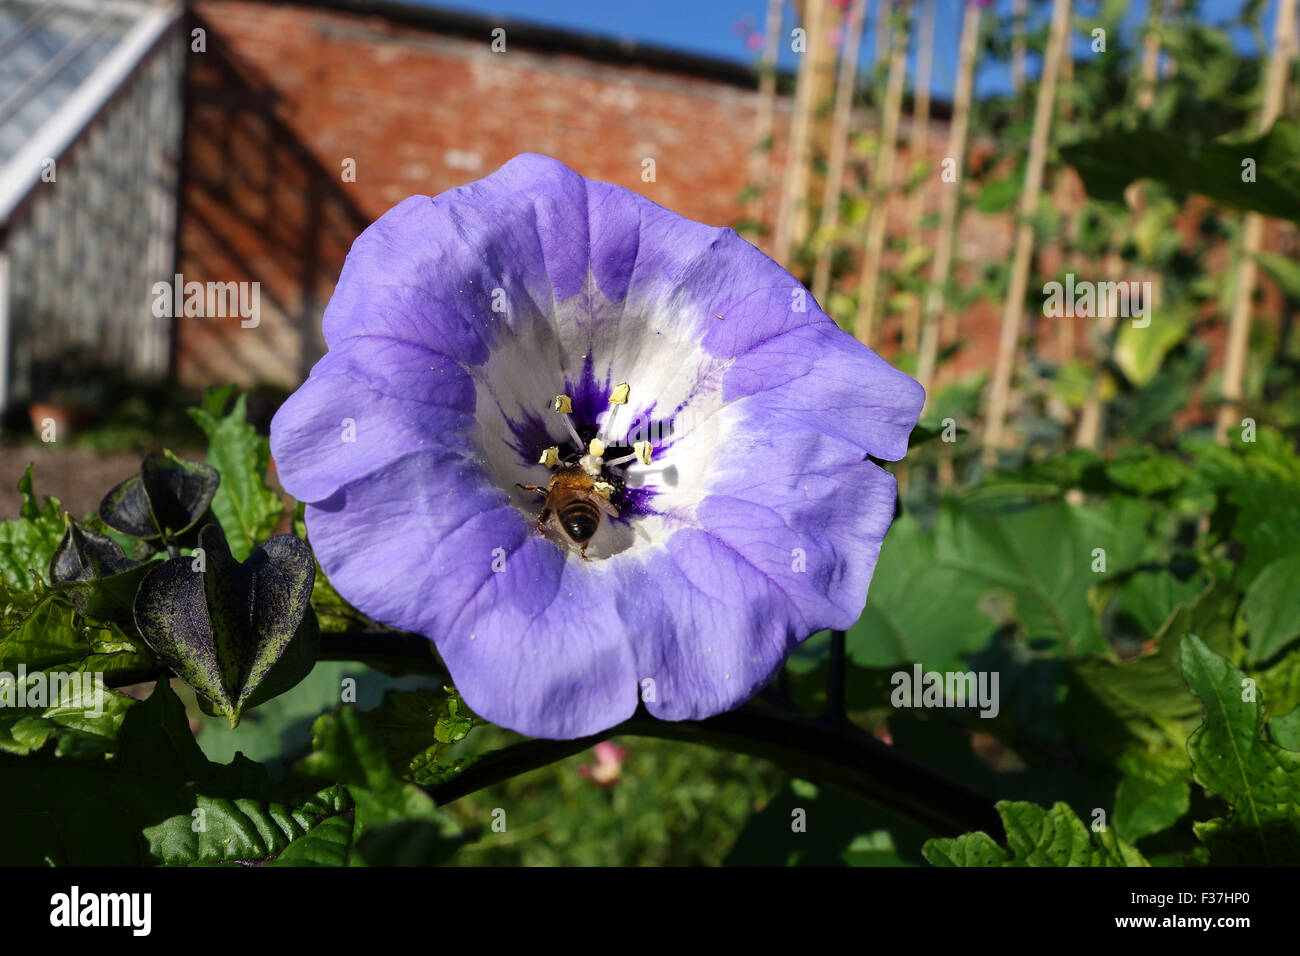 Nicandra physalodes common names apple-of-Peru and shoo-fly plant Stock Photo